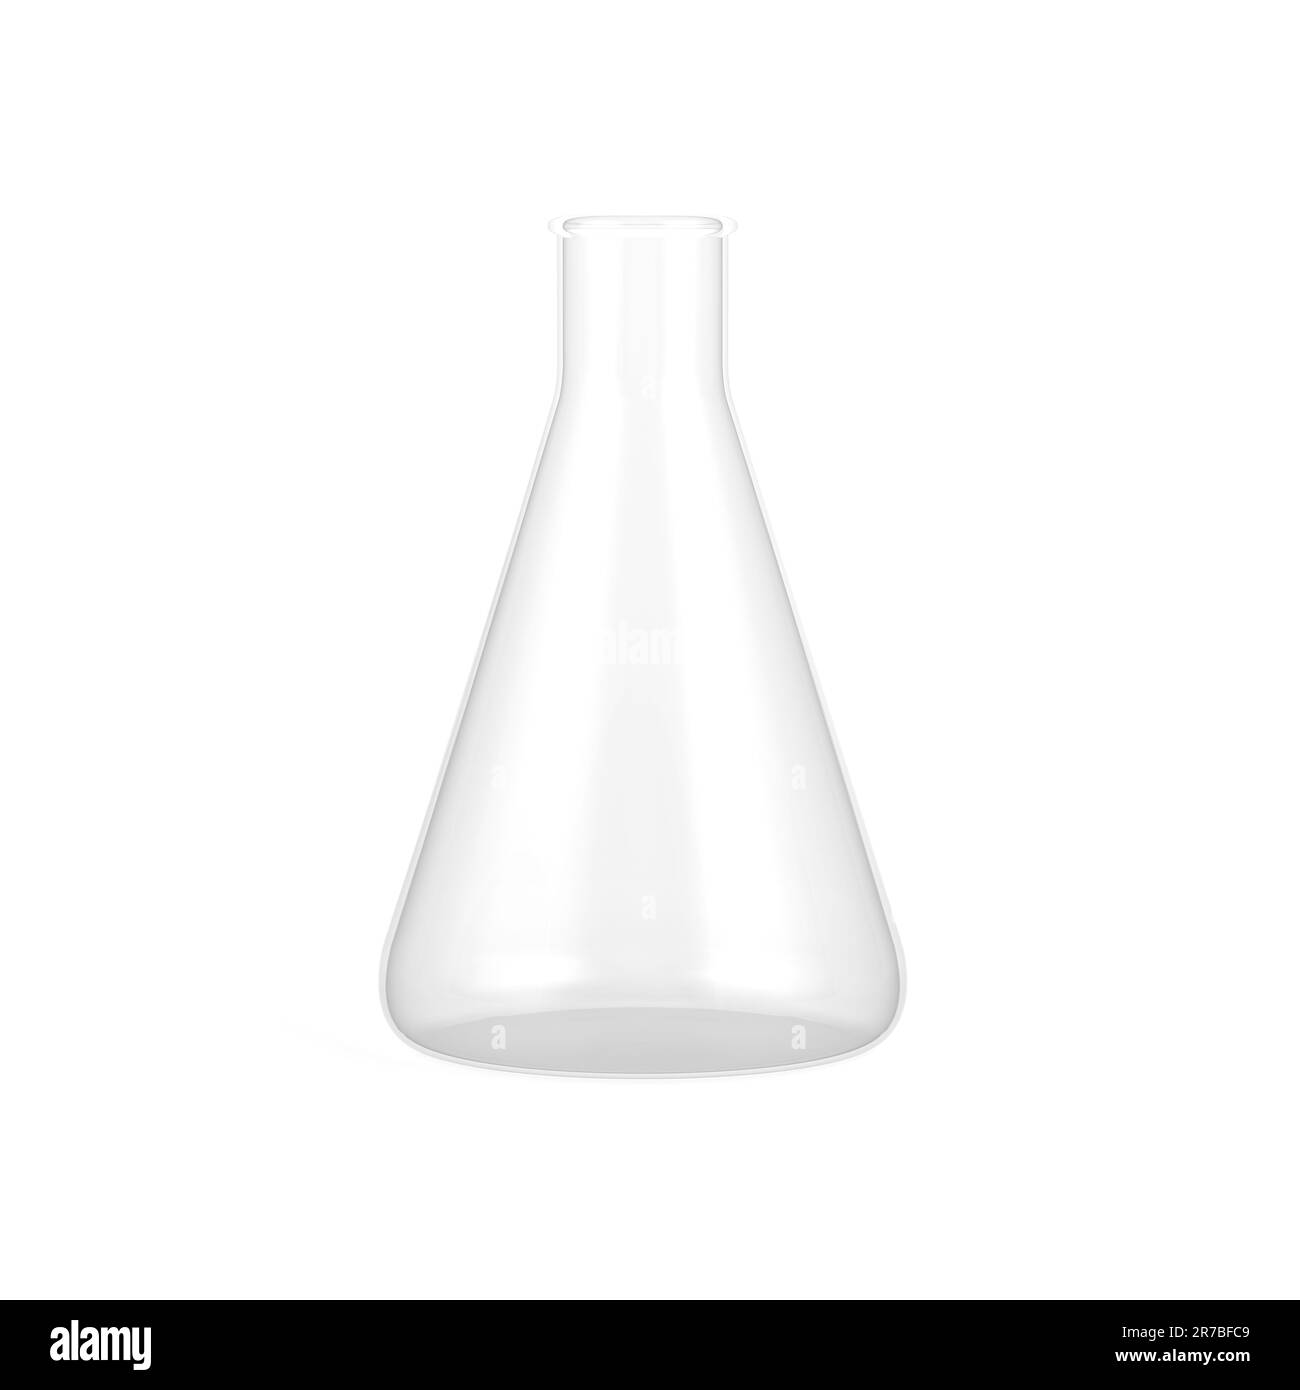 Conical flask isolated on white background. Erlenmeyer flask. Laboratory flask. 3d illustration. Stock Photo